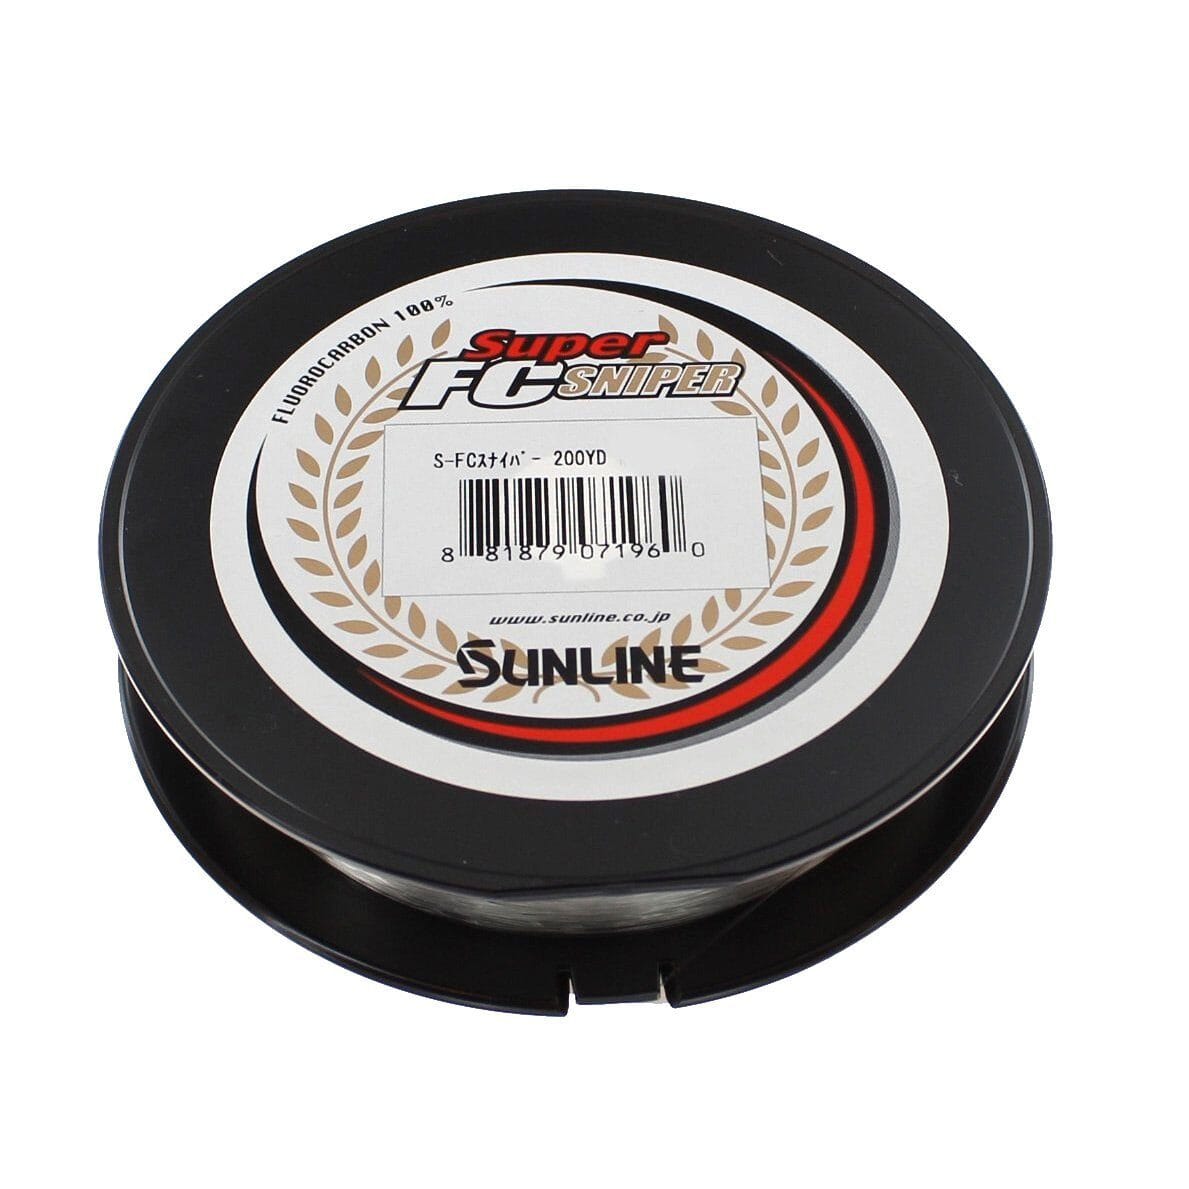 P-Line Tactical Japanese Fluorocarbon 200 Yards — Discount Tackle